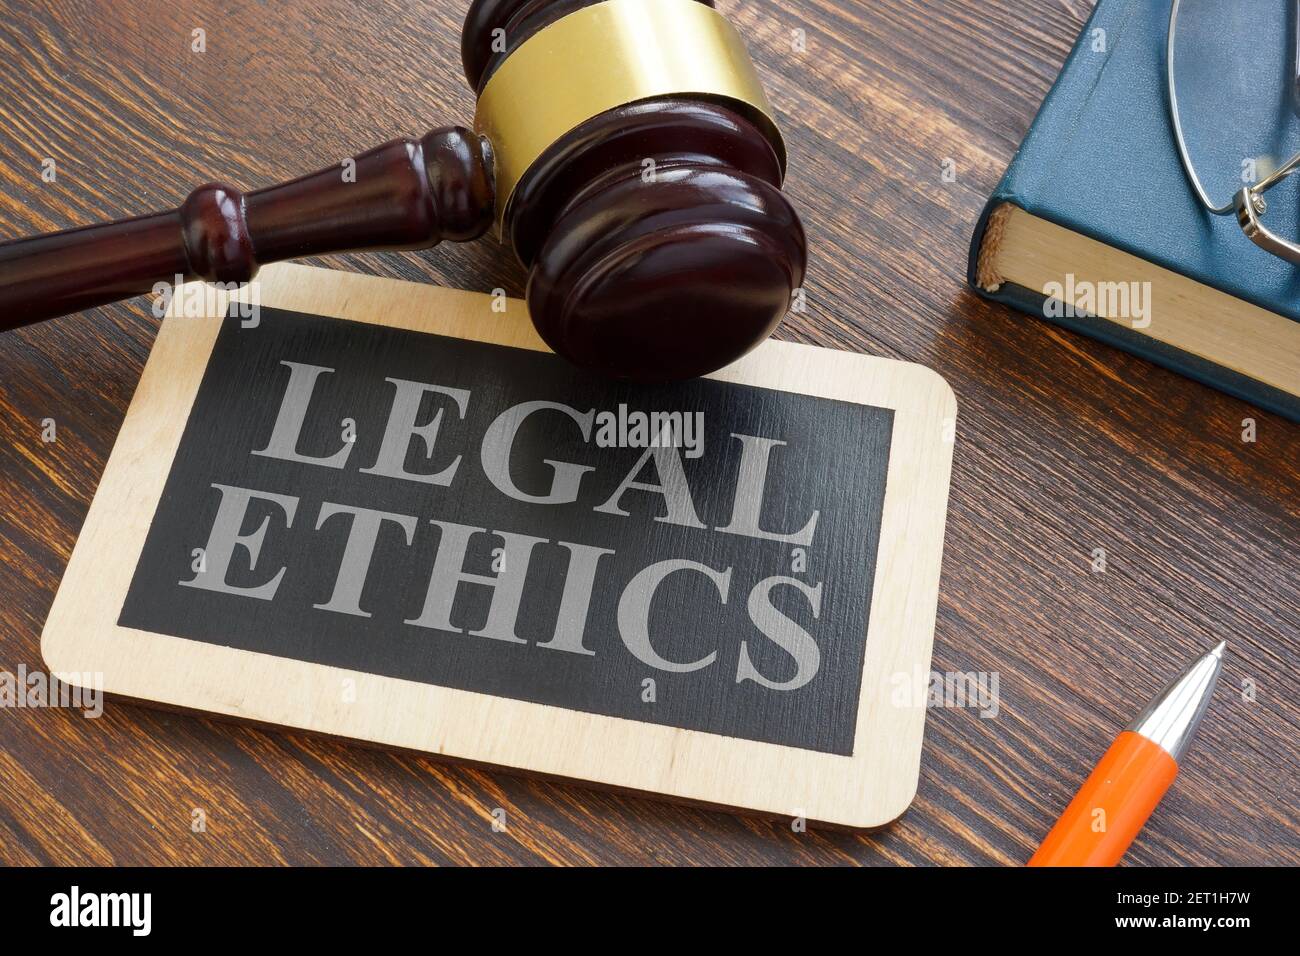 Legal ethics words on the plate and gavel. Stock Photo